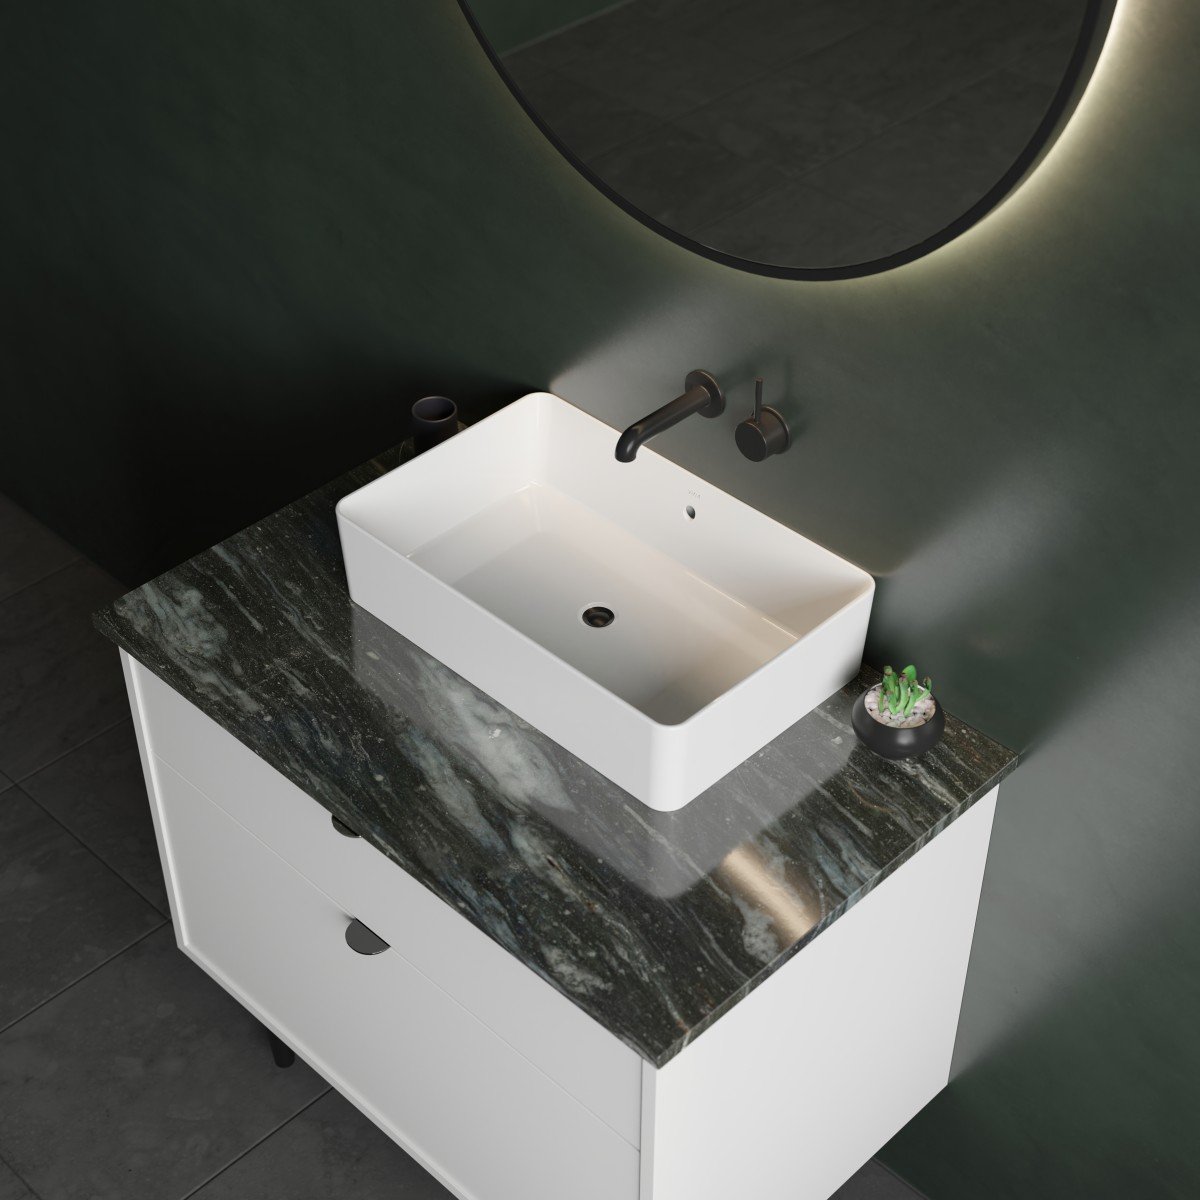 NUO 2 Vessel Sink-related